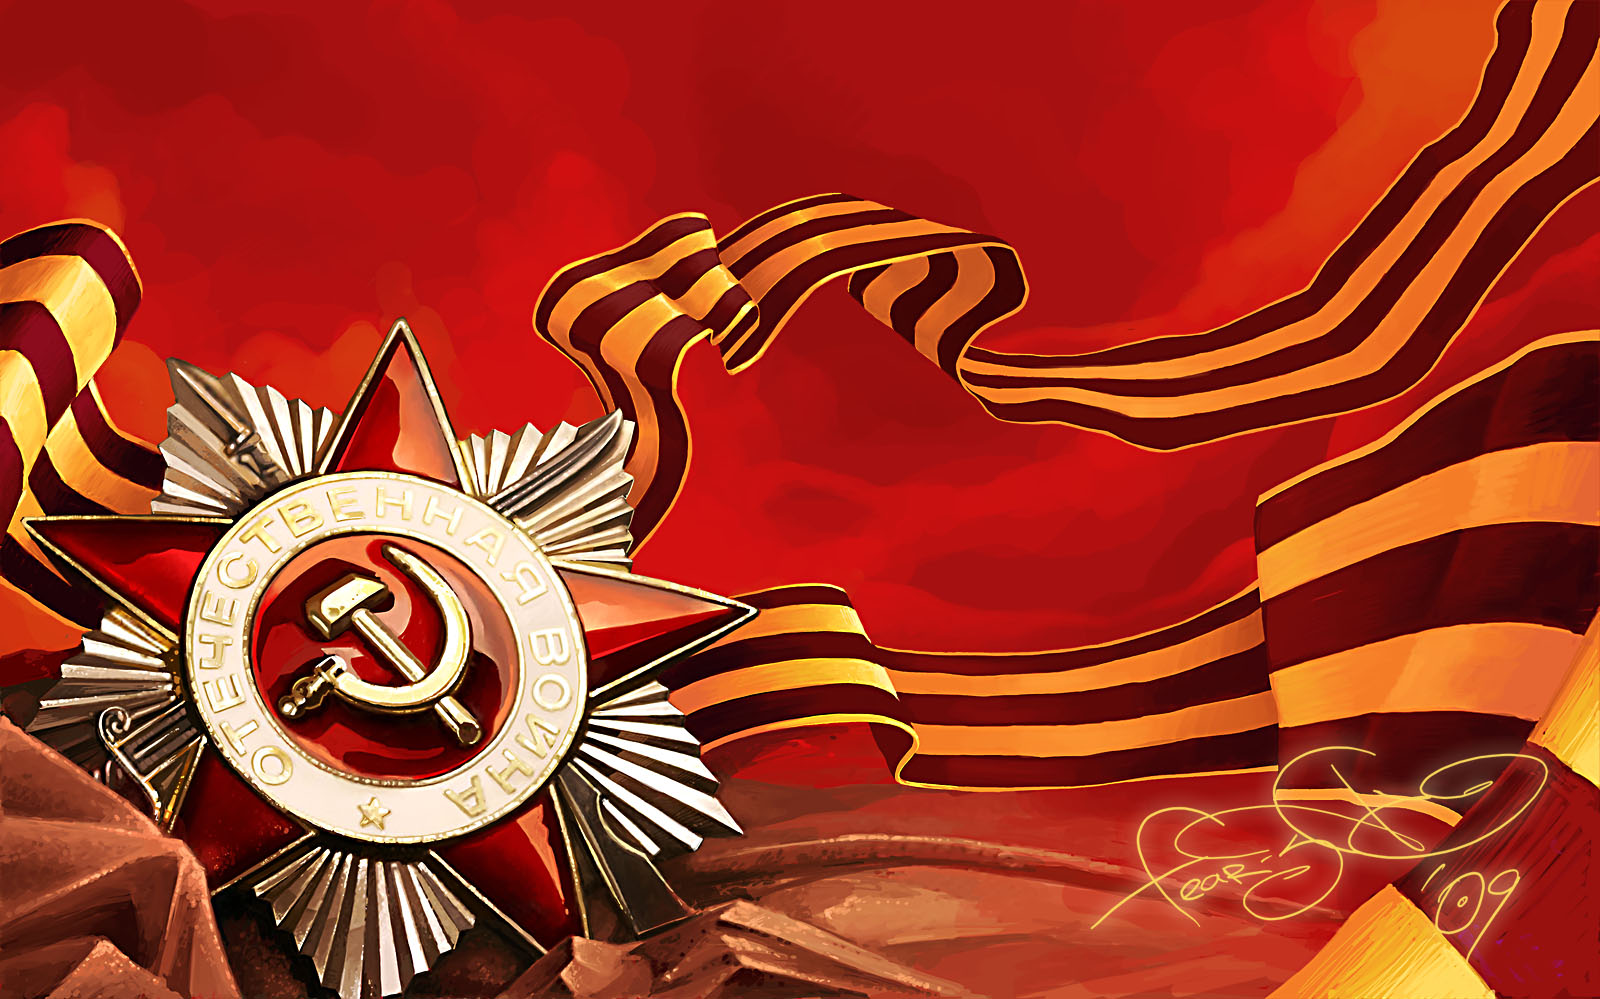 Victory Day (9 May) HD wallpapers, Desktop wallpaper - most viewed